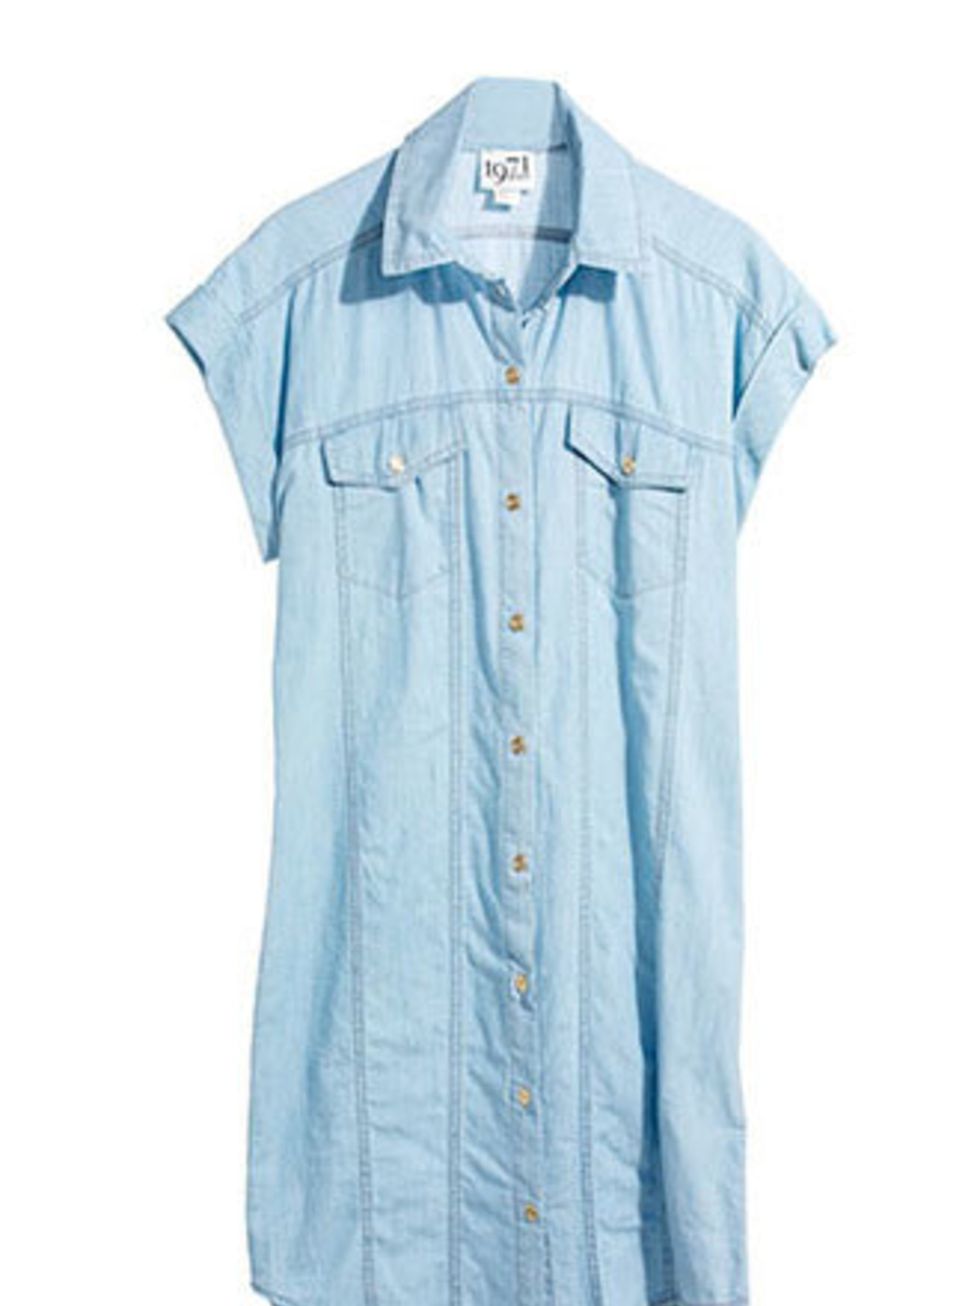 <p>Thanks to Chloe the double denim trend is back. Invest in this pale denim shirt and pair with dark jeans. Make sure to wear it with an Americana twist  think fringed bags, brown leather accessories and suede shoes.</p><p>Shirt, £79 by <a href="http://